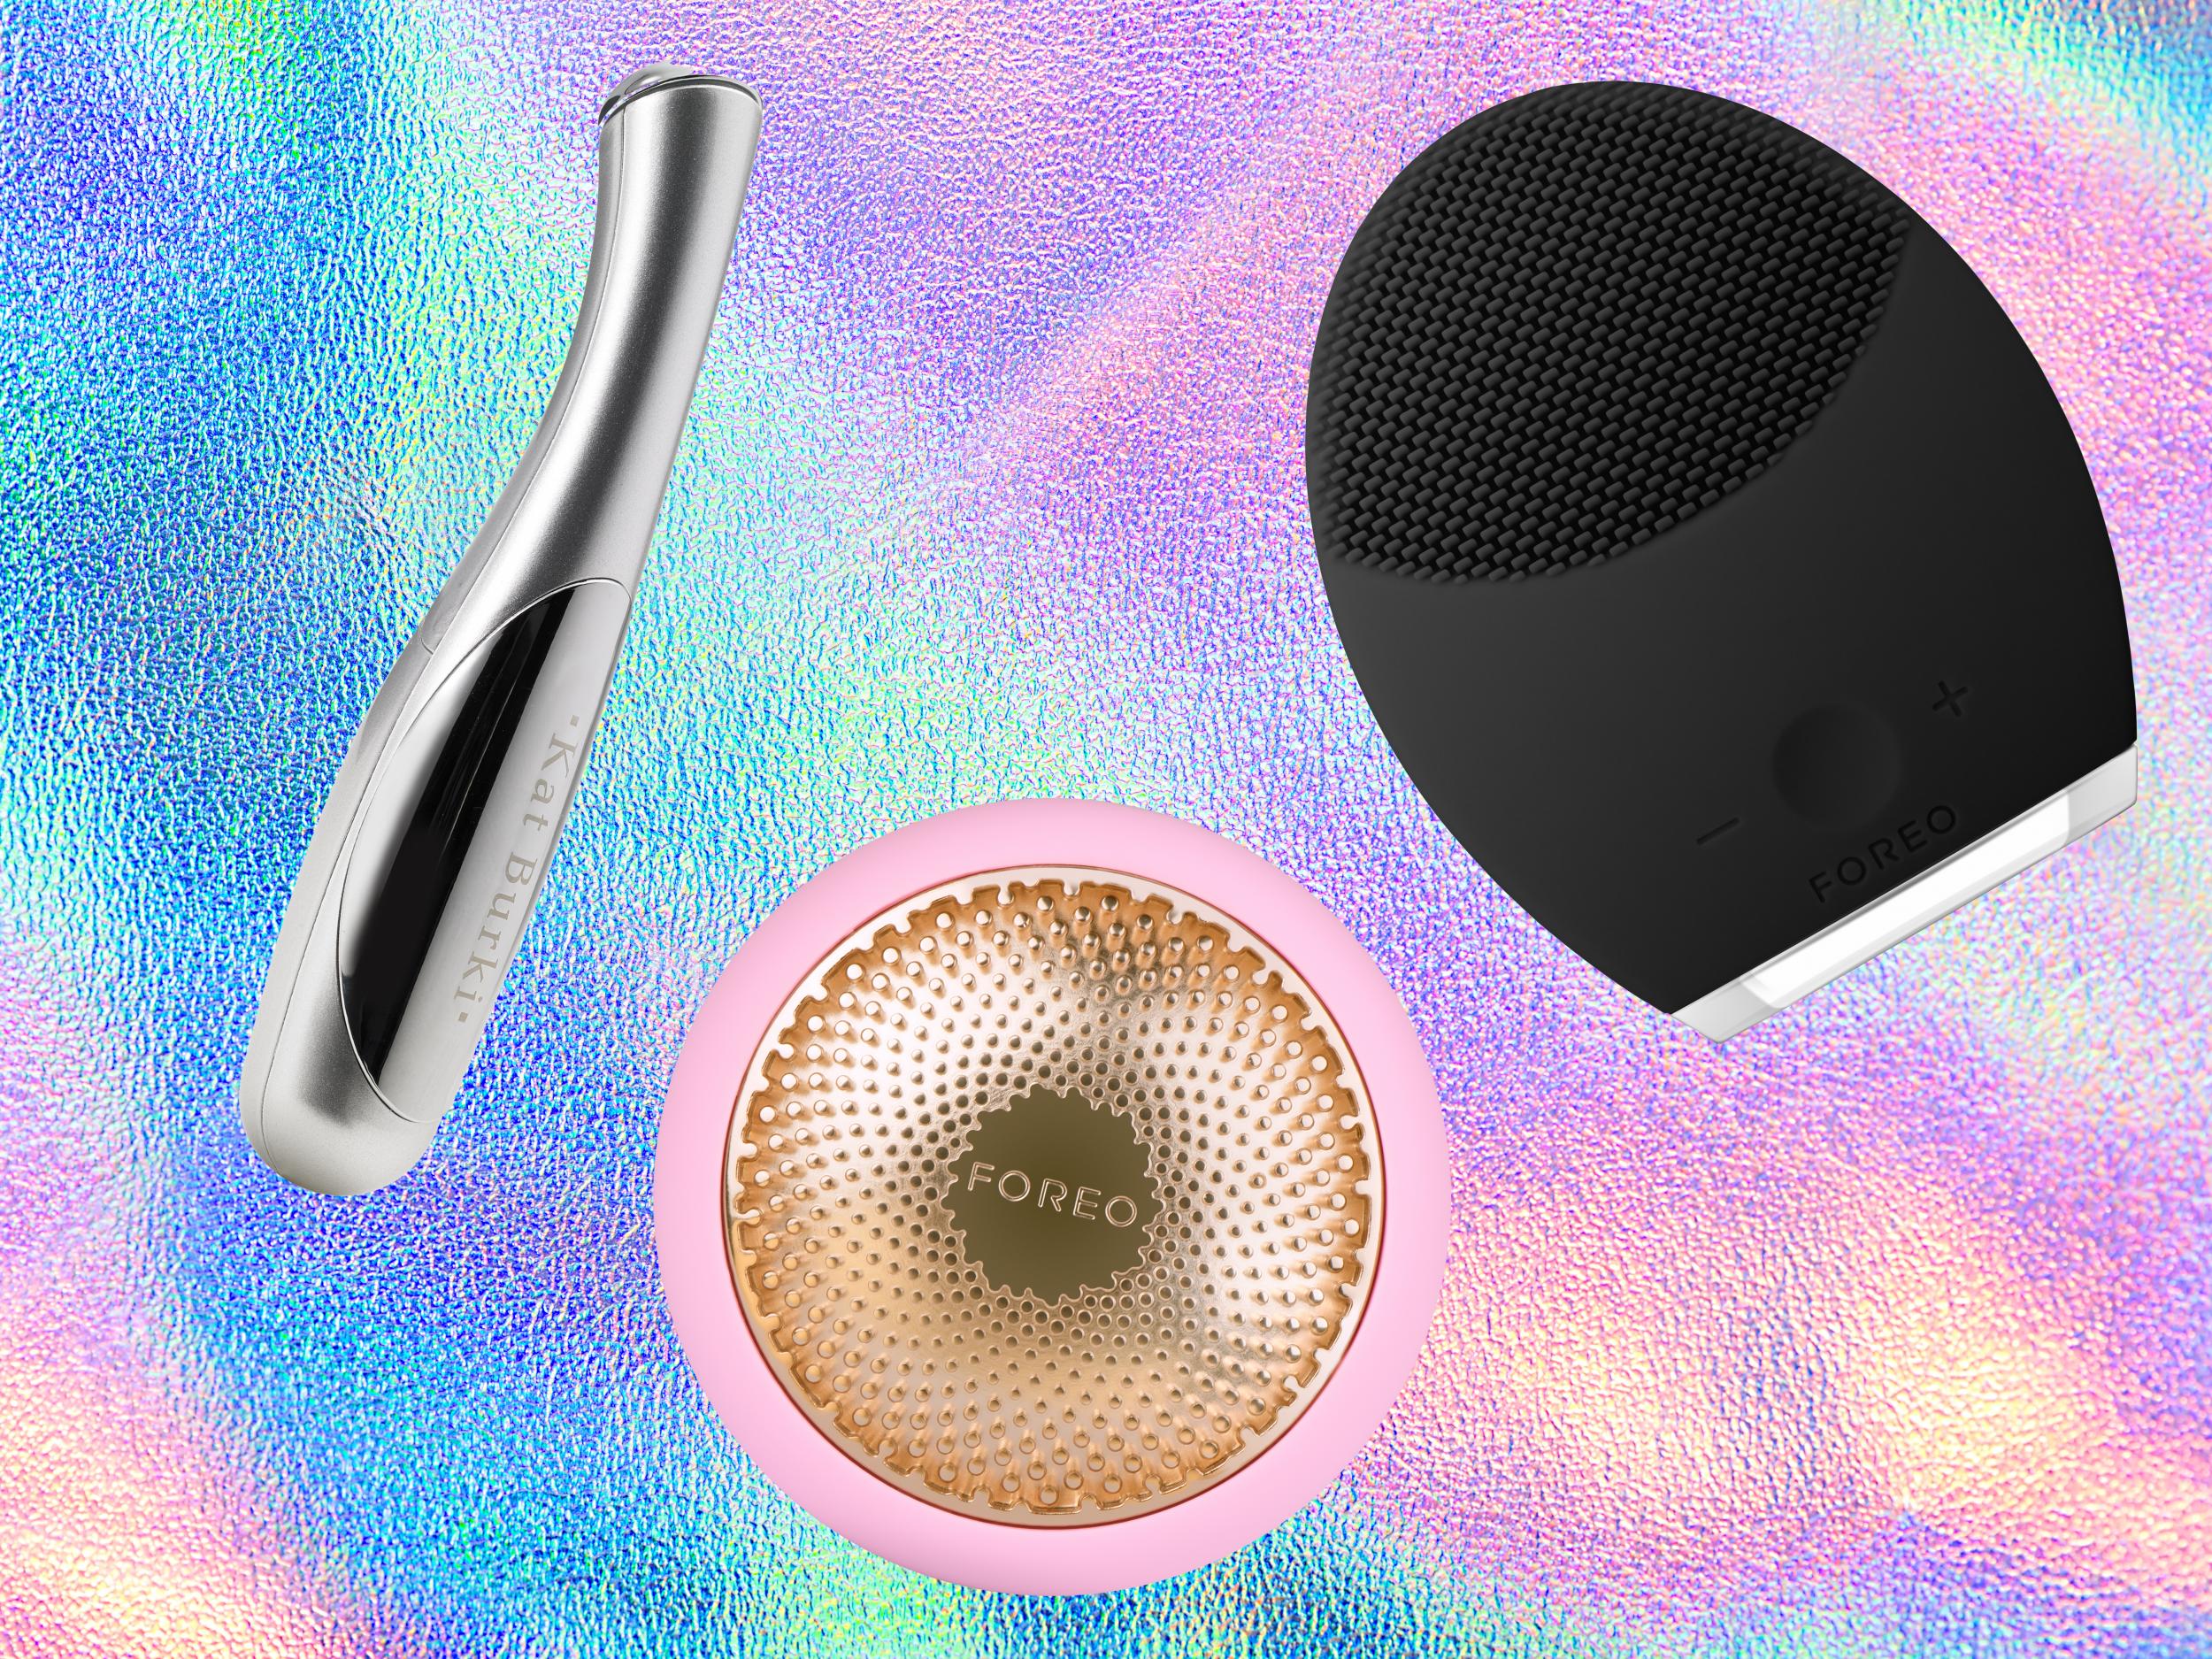 From nanotechnology to LED light therapy, these tools don't mess around